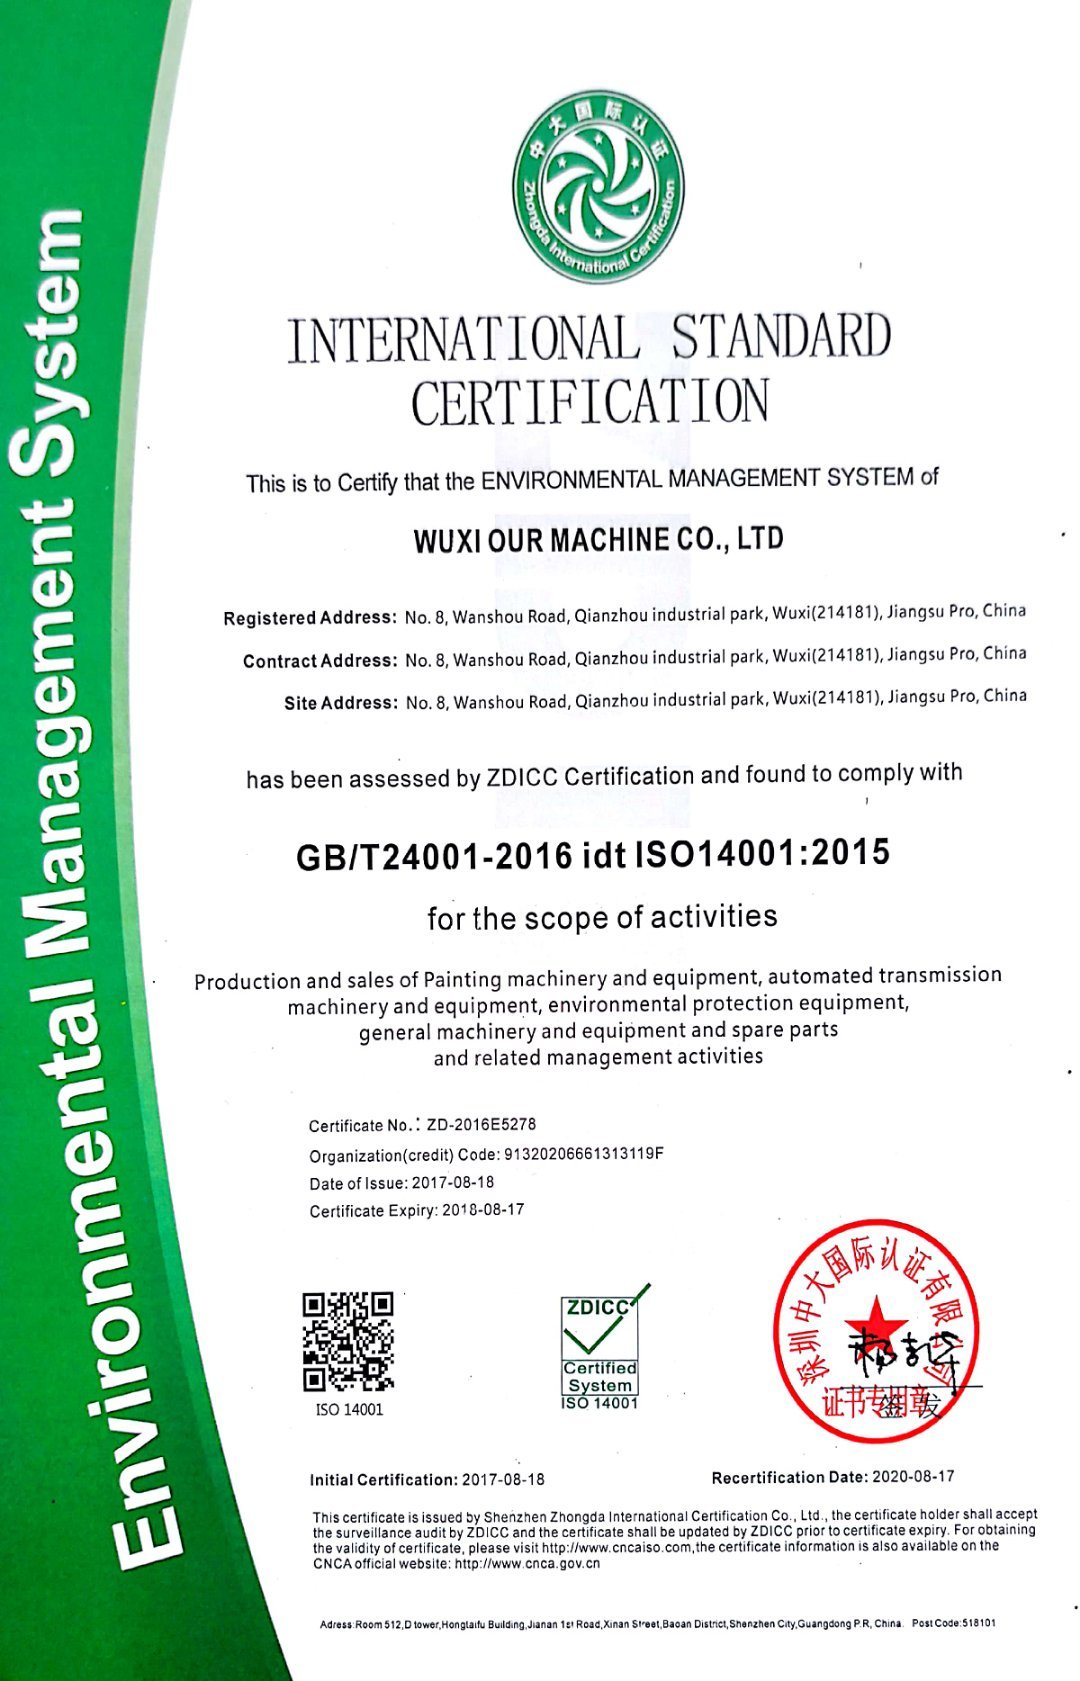 ISO14001 certificate of machinery and spare parts